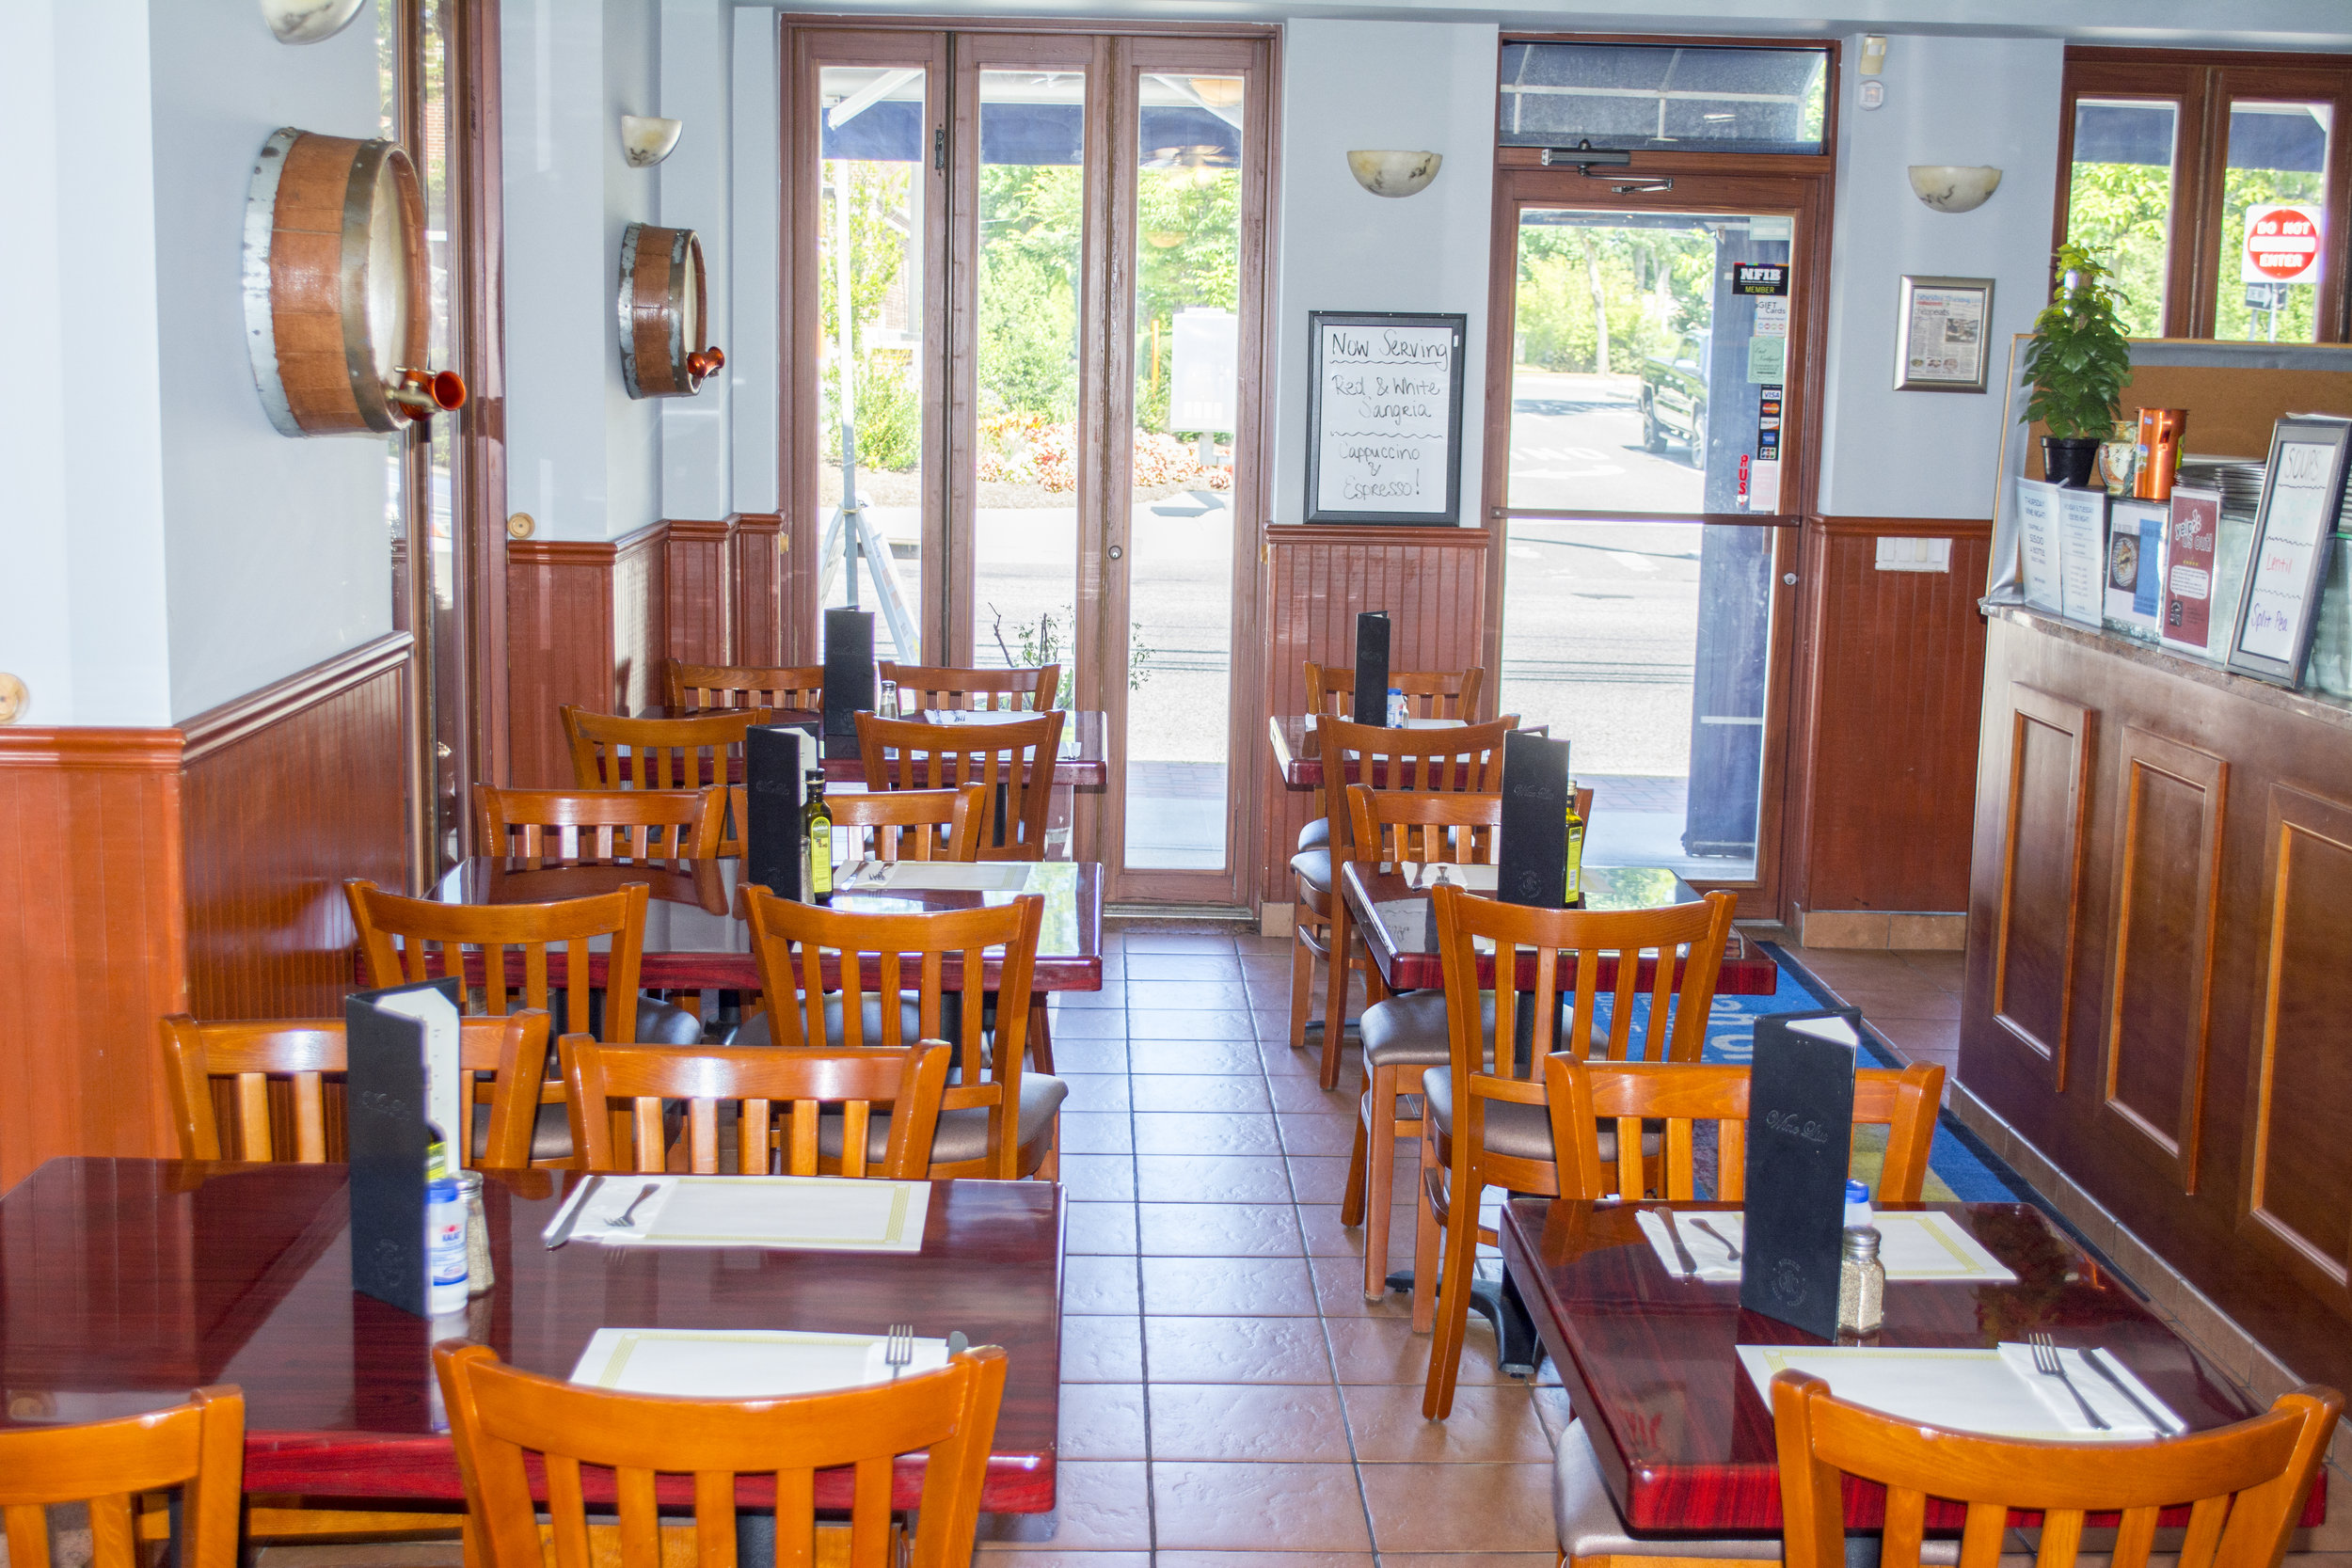   The Aegean Grill on Larkfield Road in East Northport offers take-out and delivery options, as well as an inviting sit down dining area.    